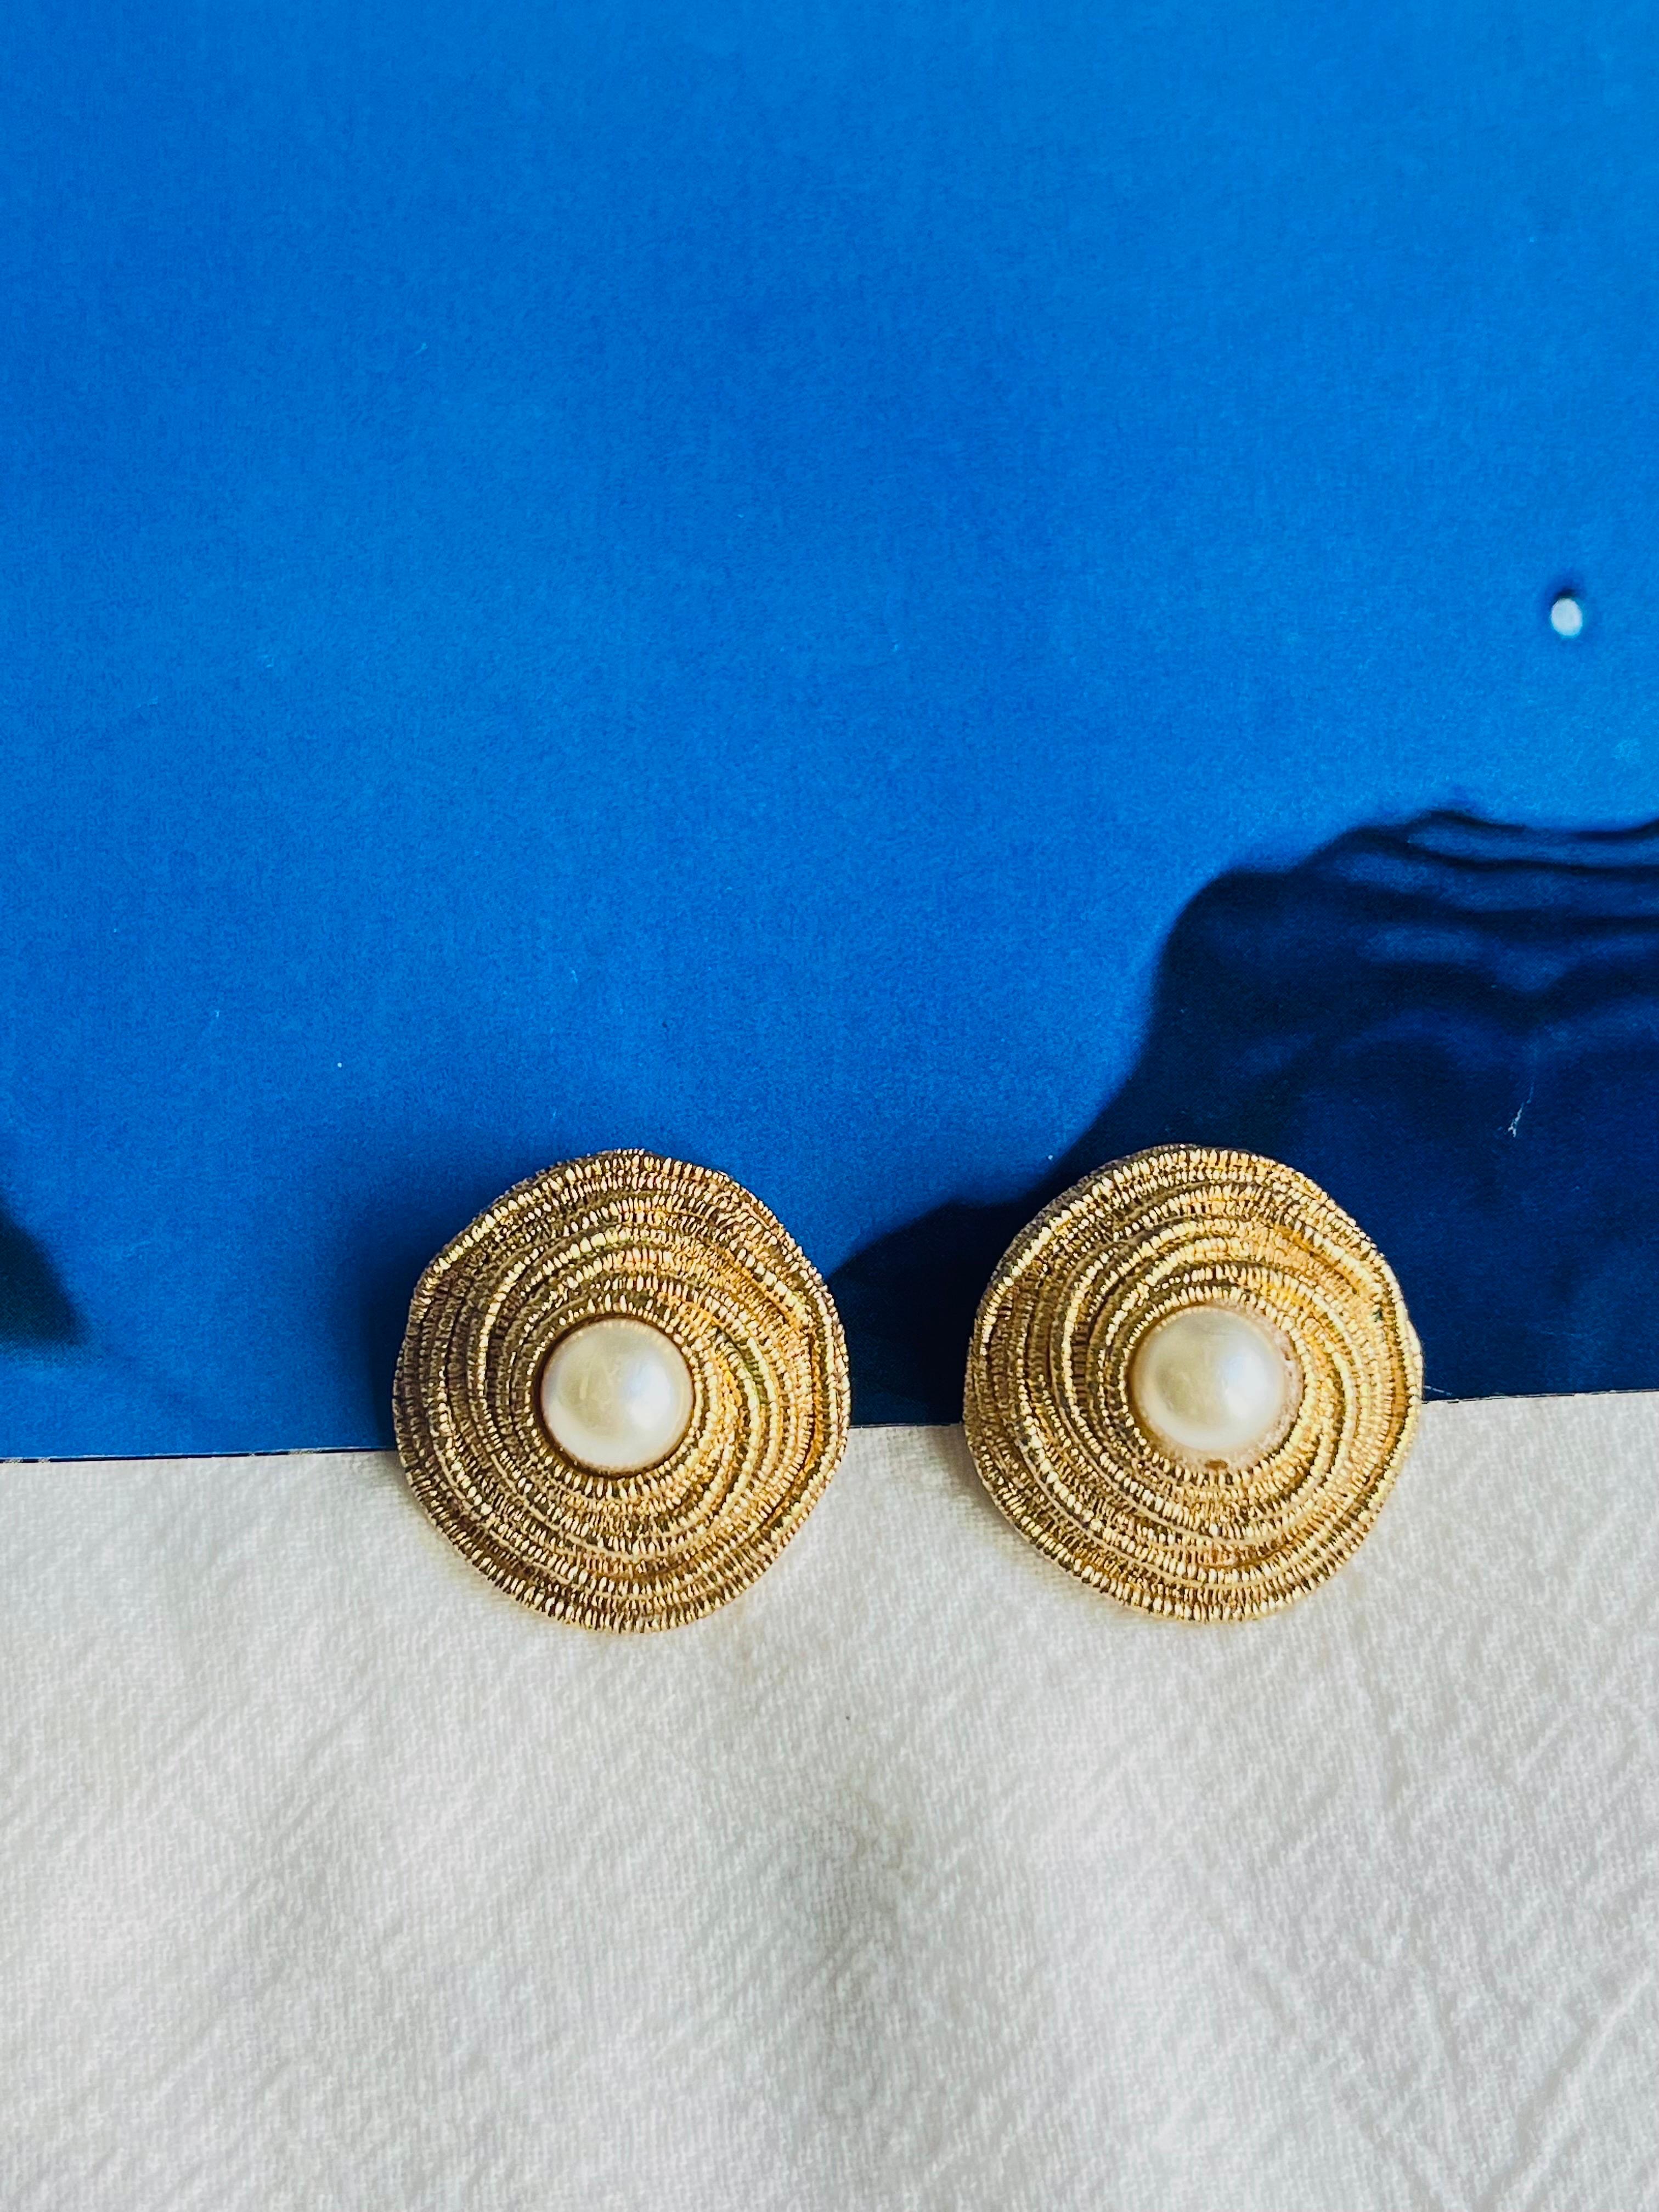 Women's or Men's Christian Dior Vintage 1980s Irregular Spiral Round Circle Pearl Clip Earrings For Sale